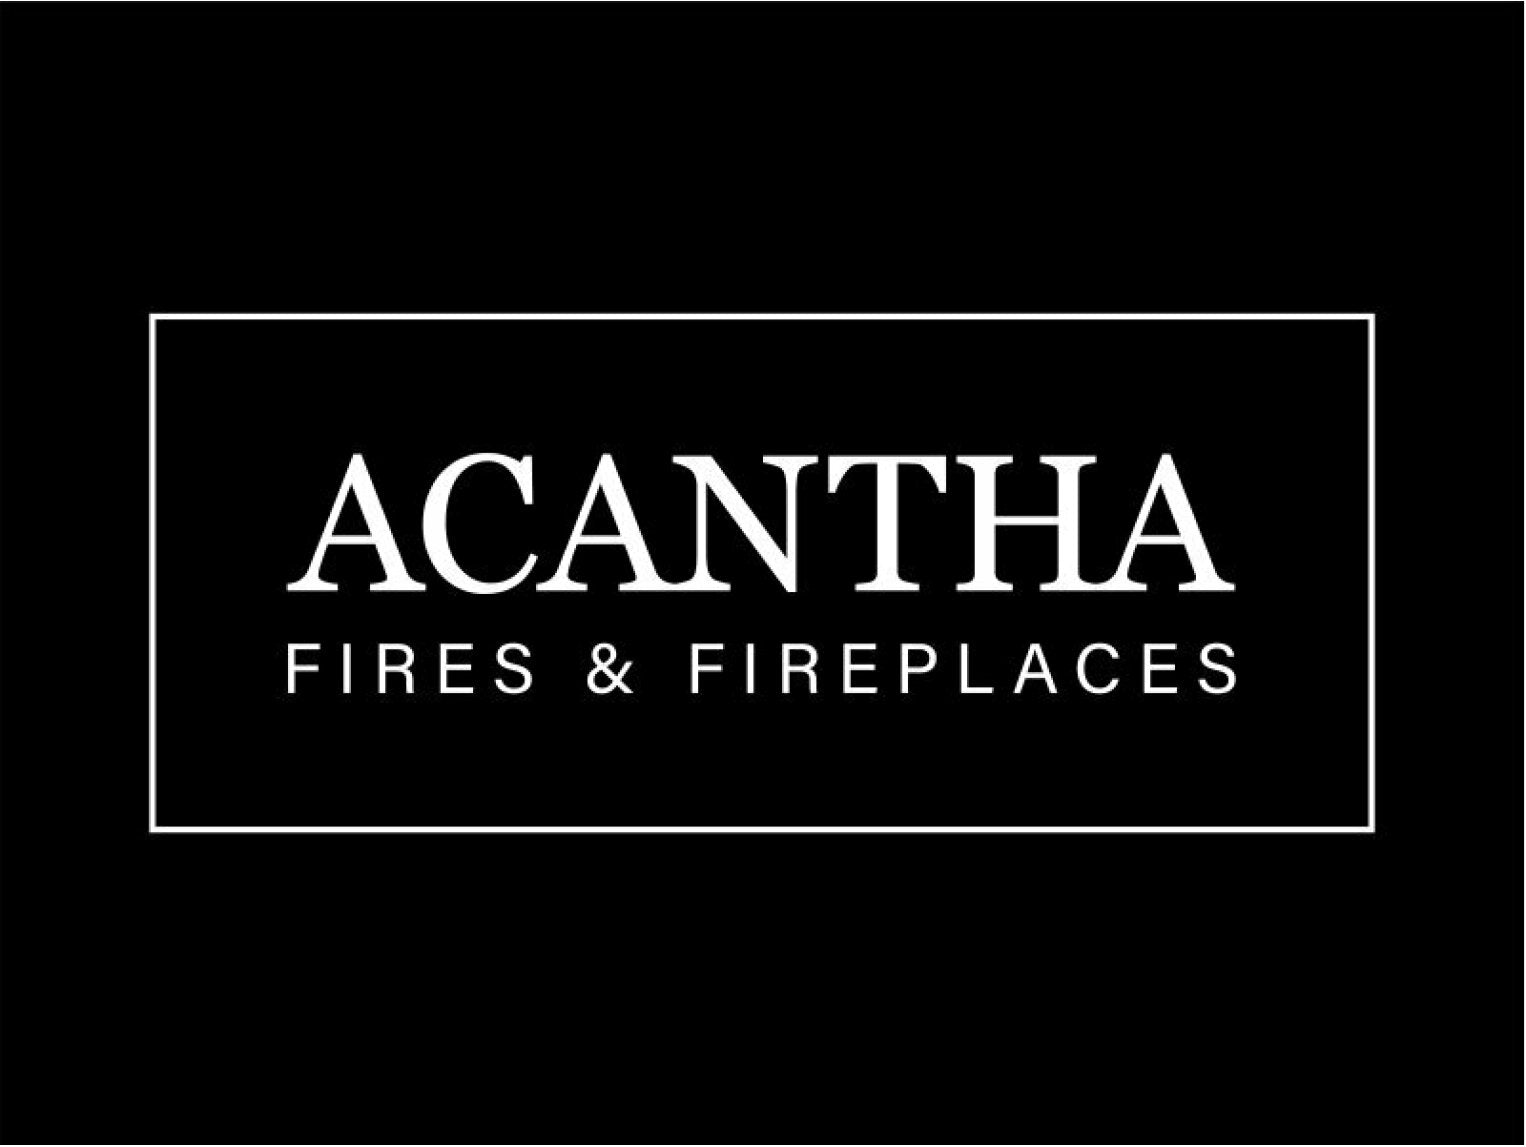 Acantha Aspire 200 Panoramic Media Wall Electric Fire🔥